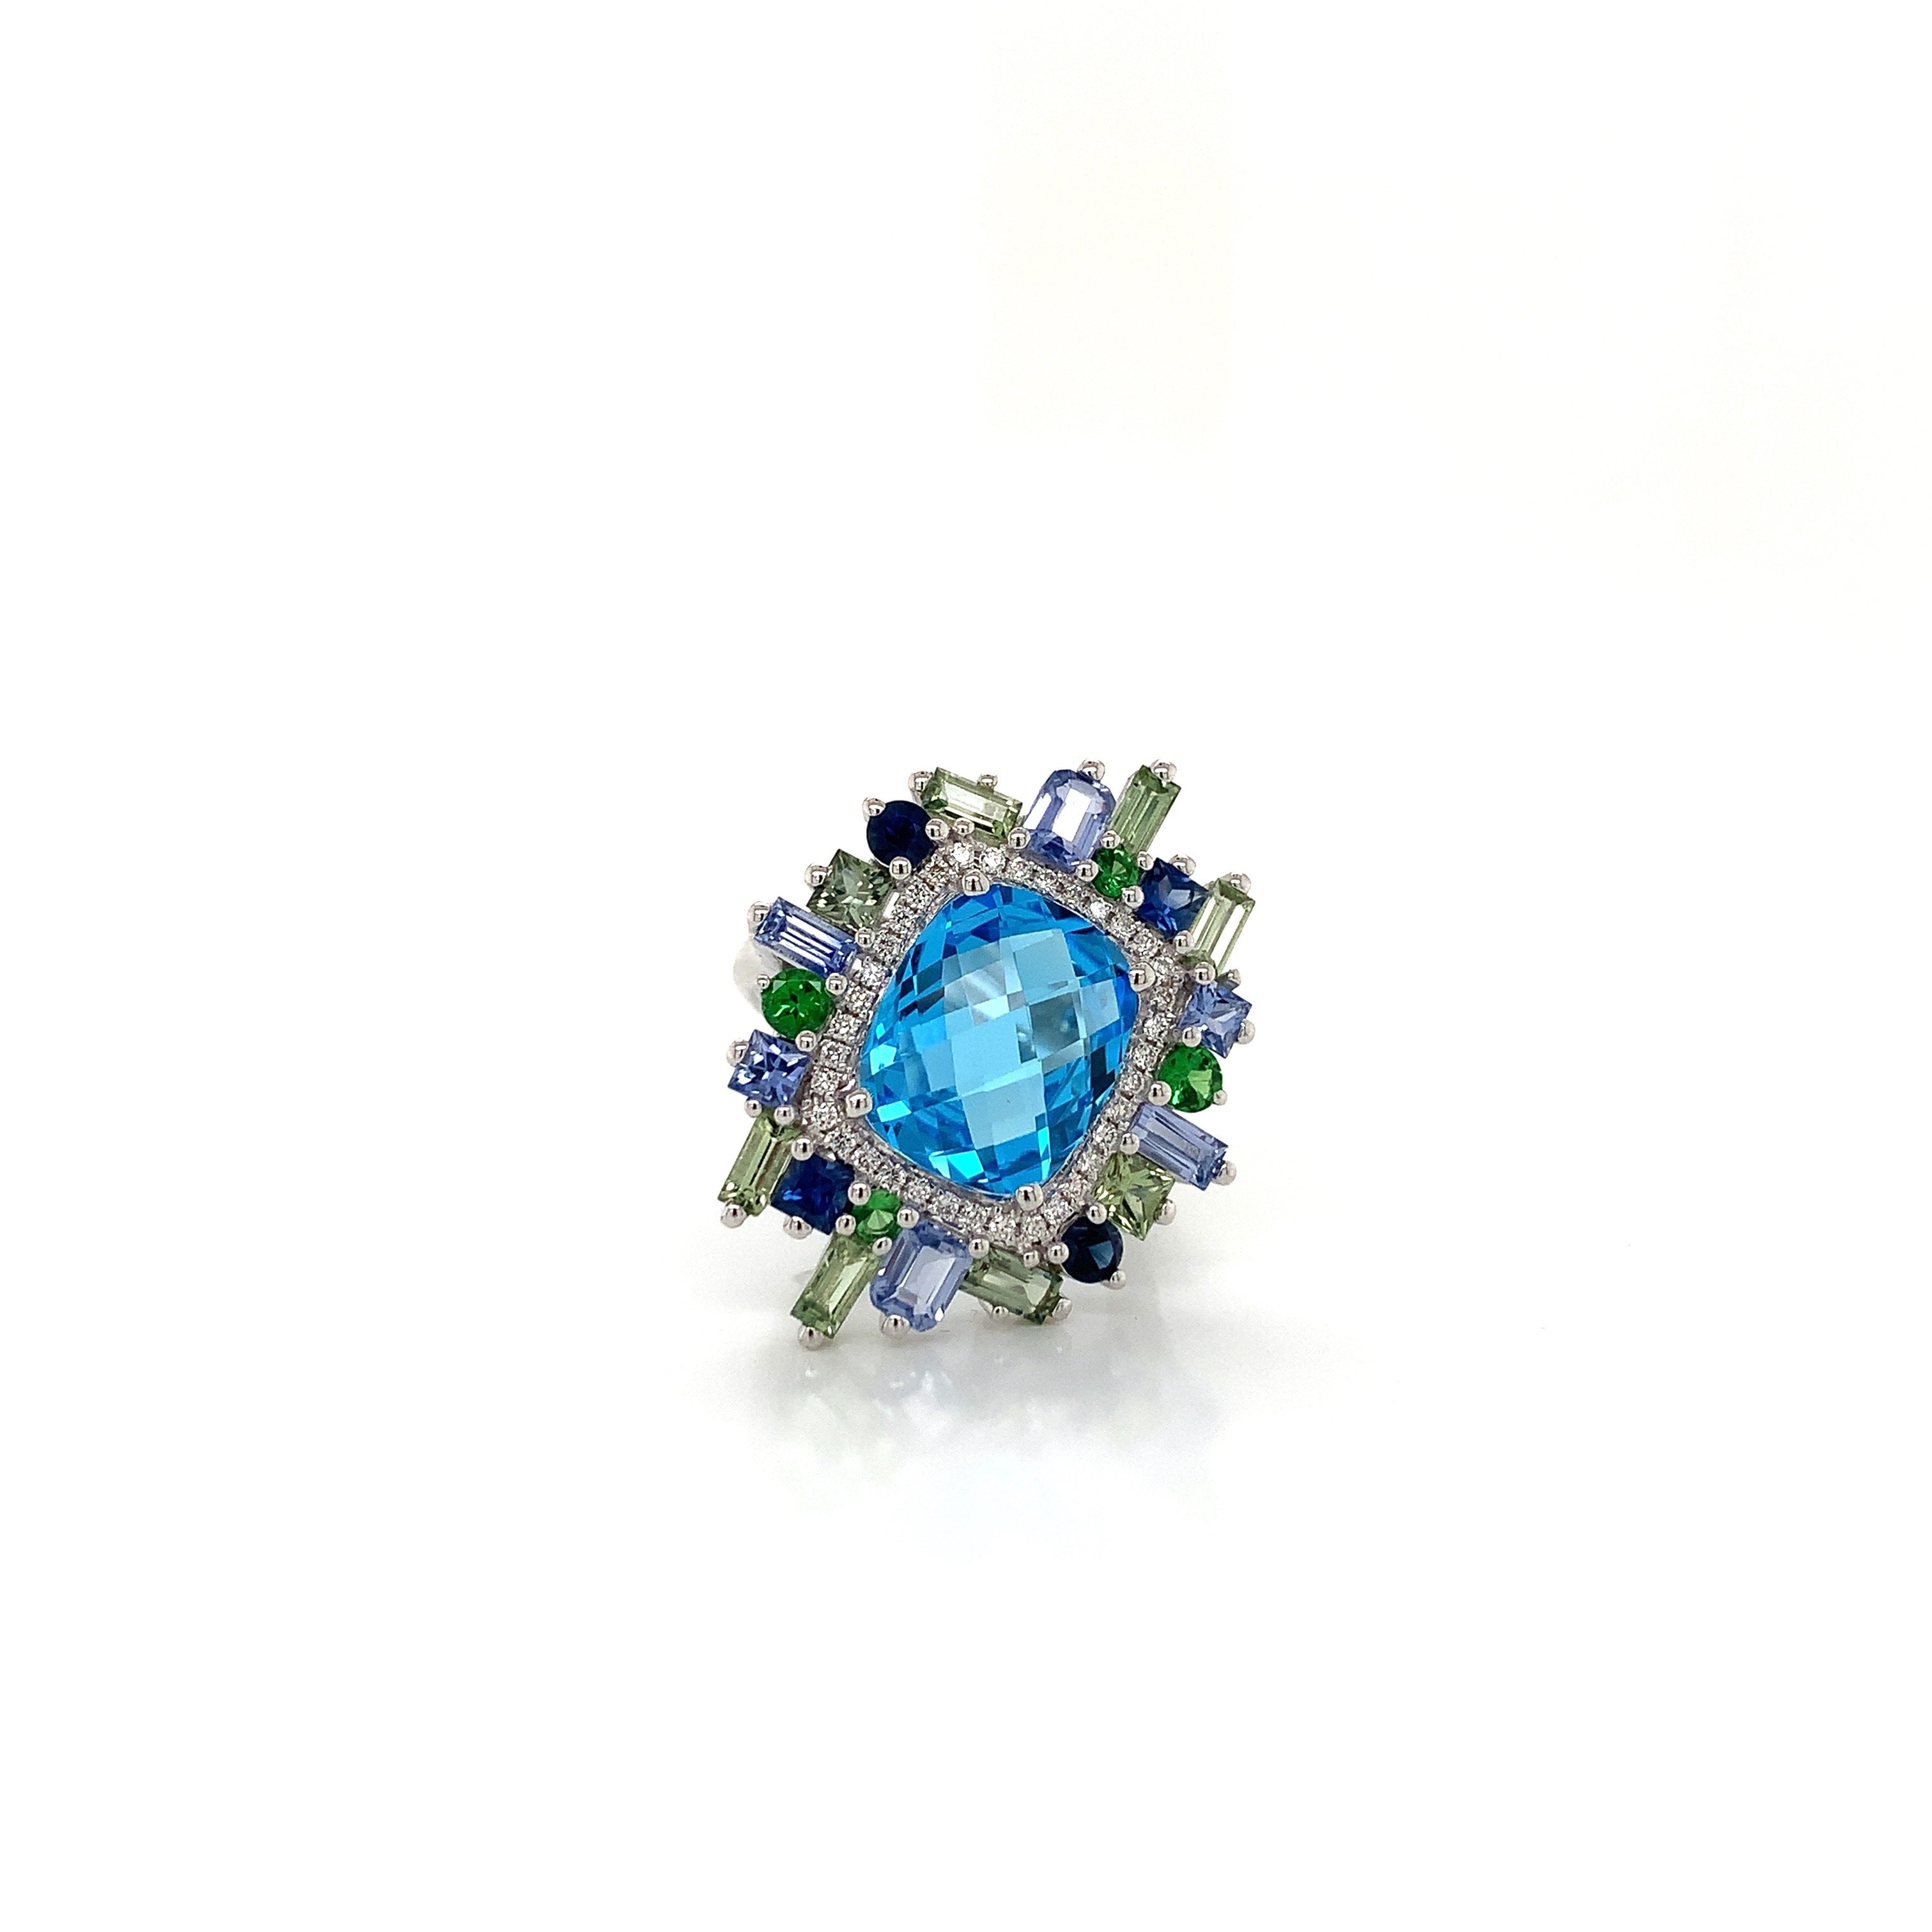 BLUE TOPAZ AND COLORED STONE RING